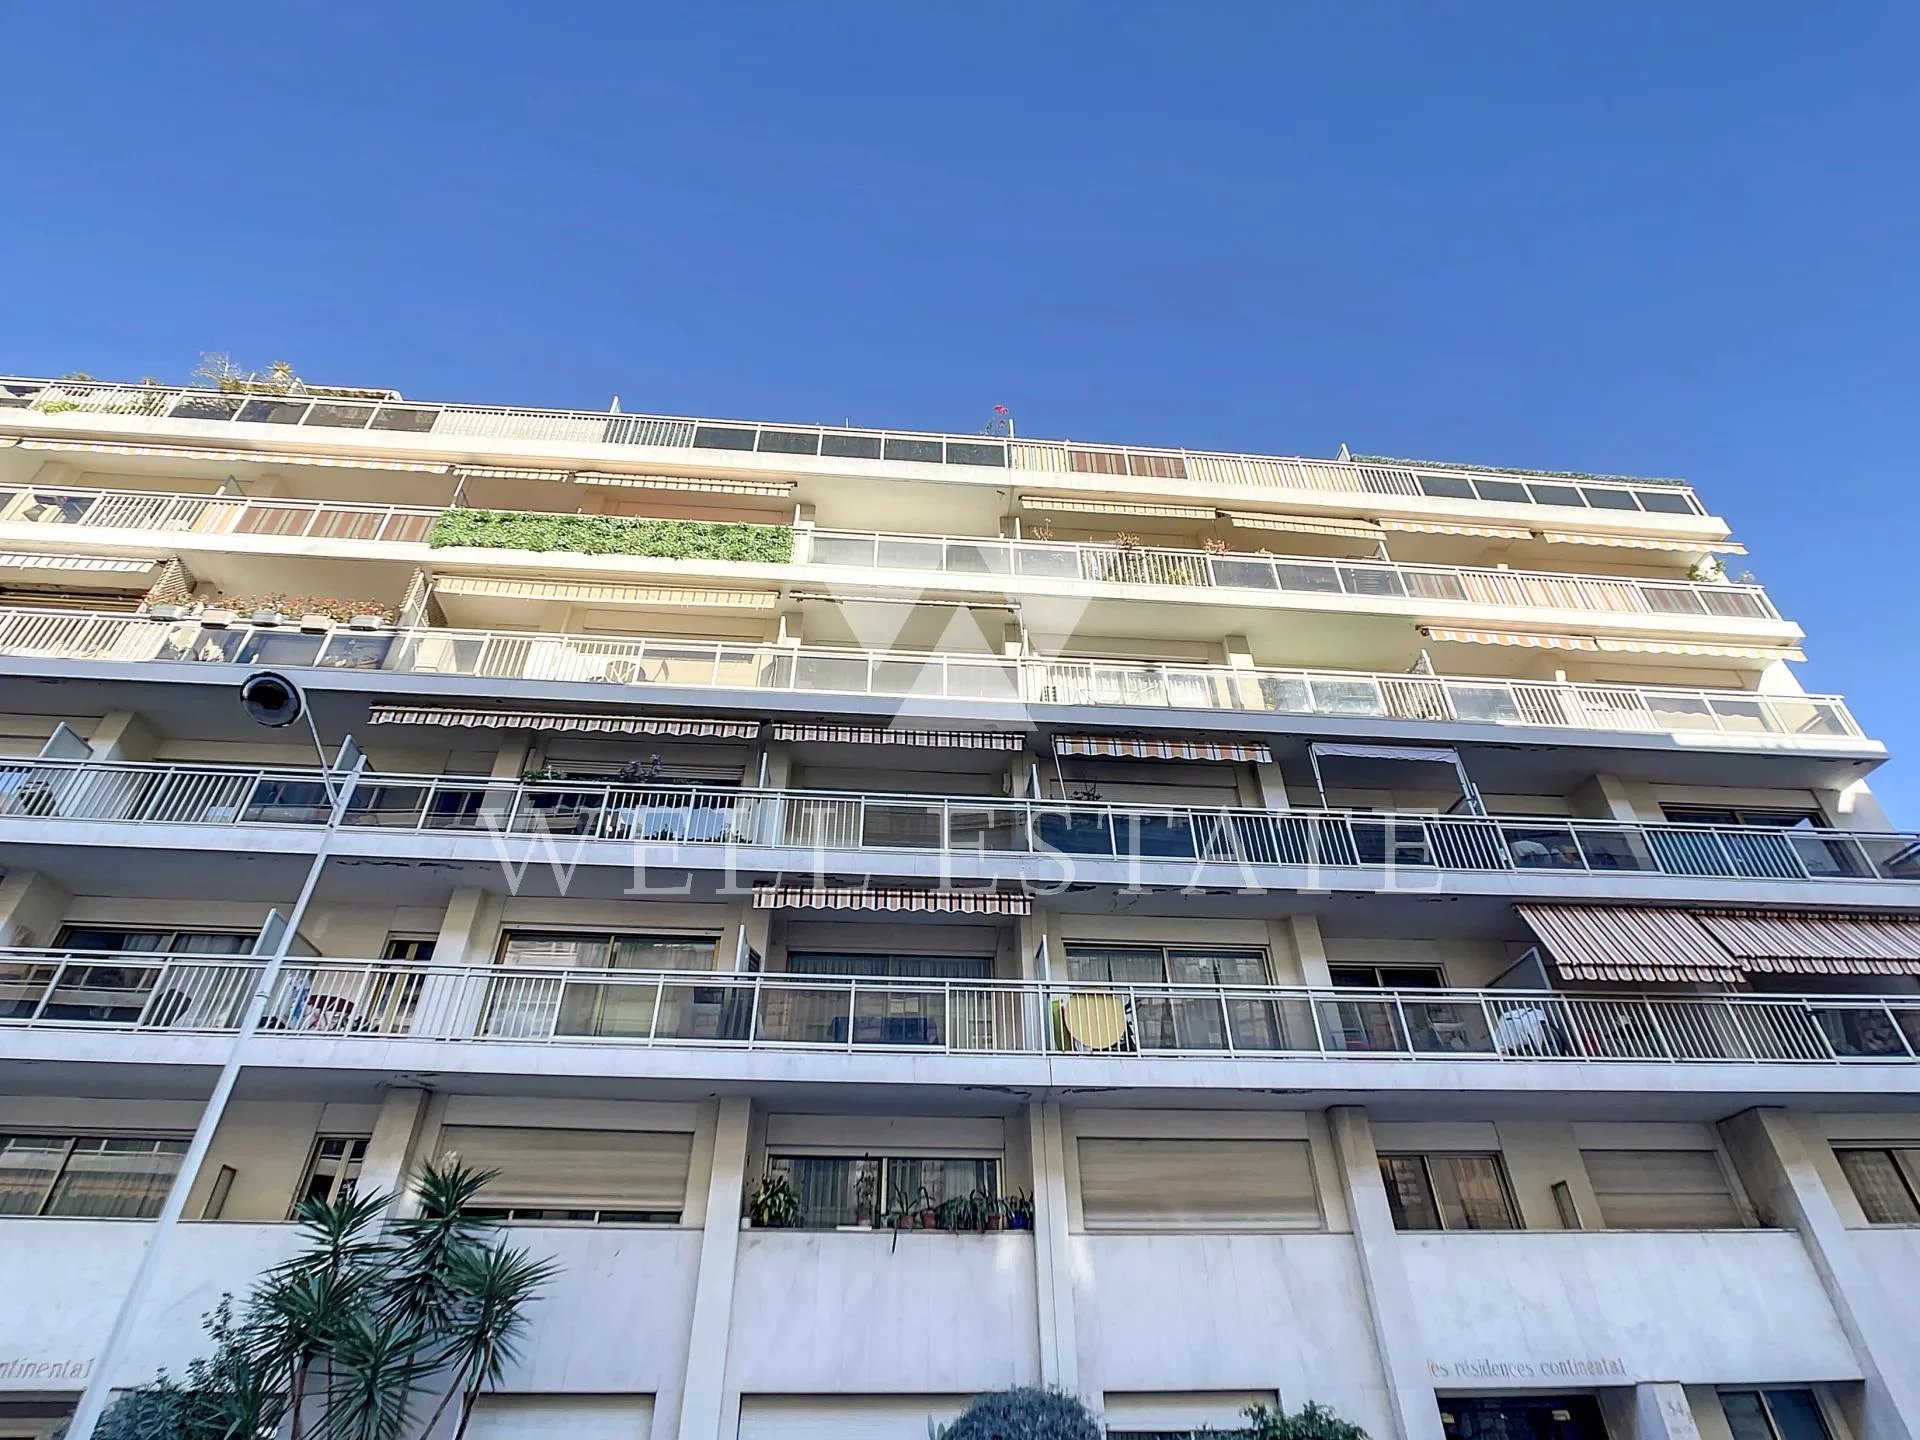 69-sqm two-bedroom flat for sale in Nice